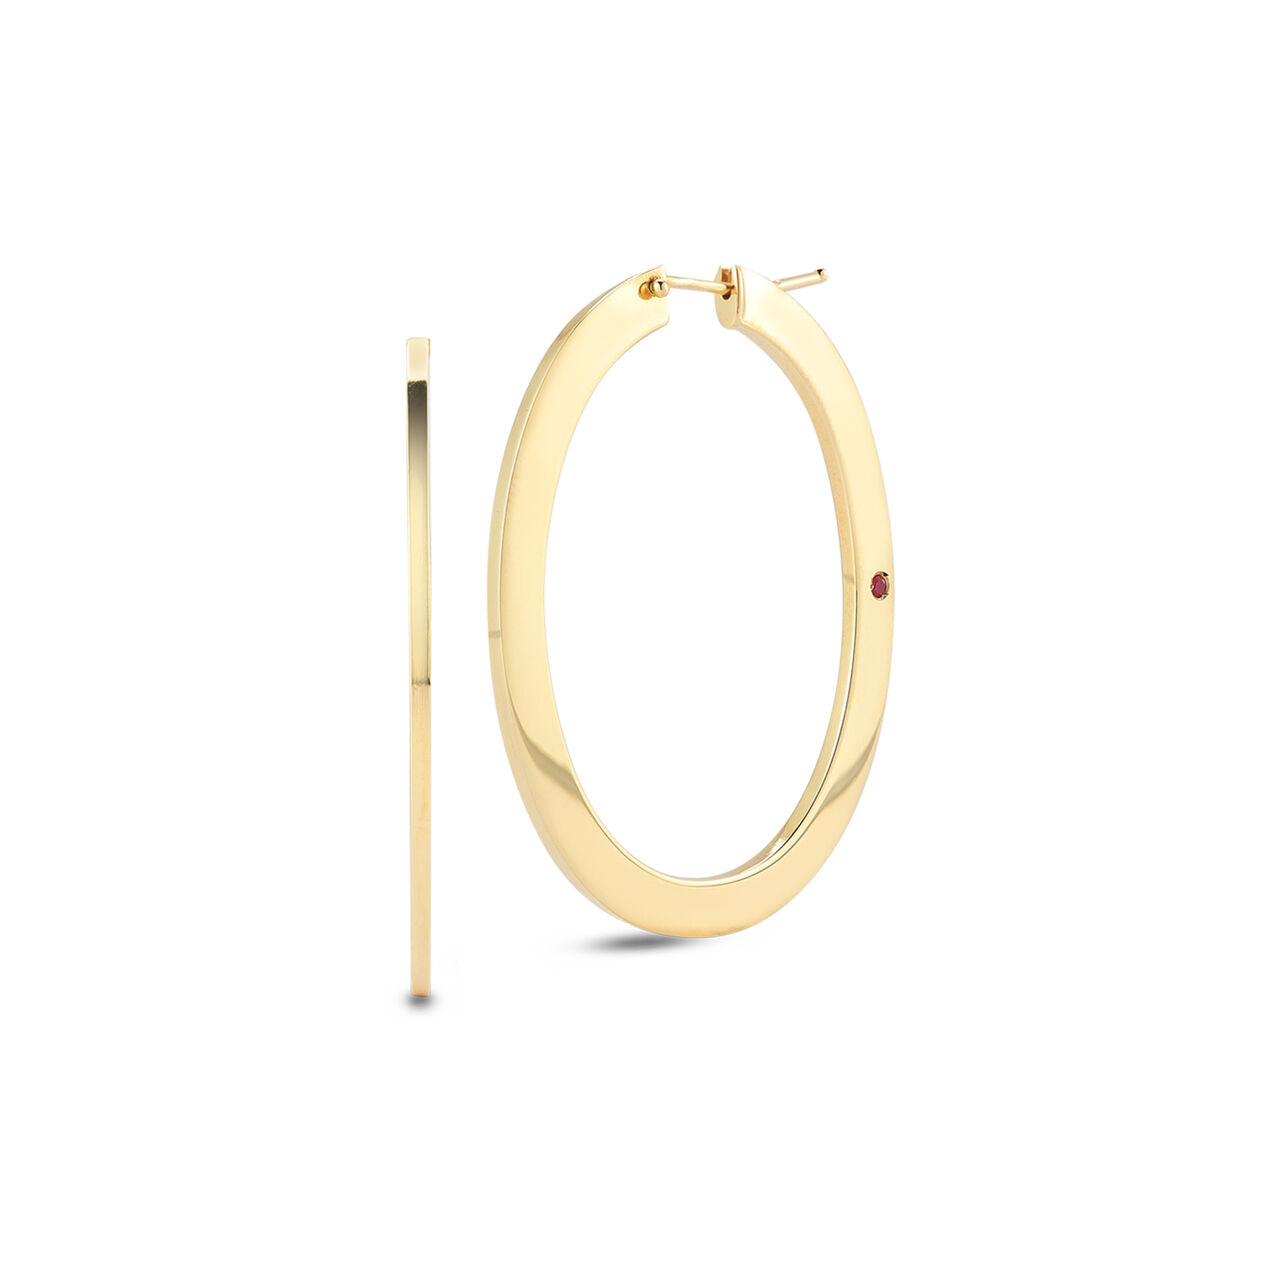 ROBERTO COIN 18K YELLOW GOLD LARGE FLAT OVAL HOOP 1 3/4" LONG BY 1 1/2" WIDE FROM THE GOLD COLLECTION